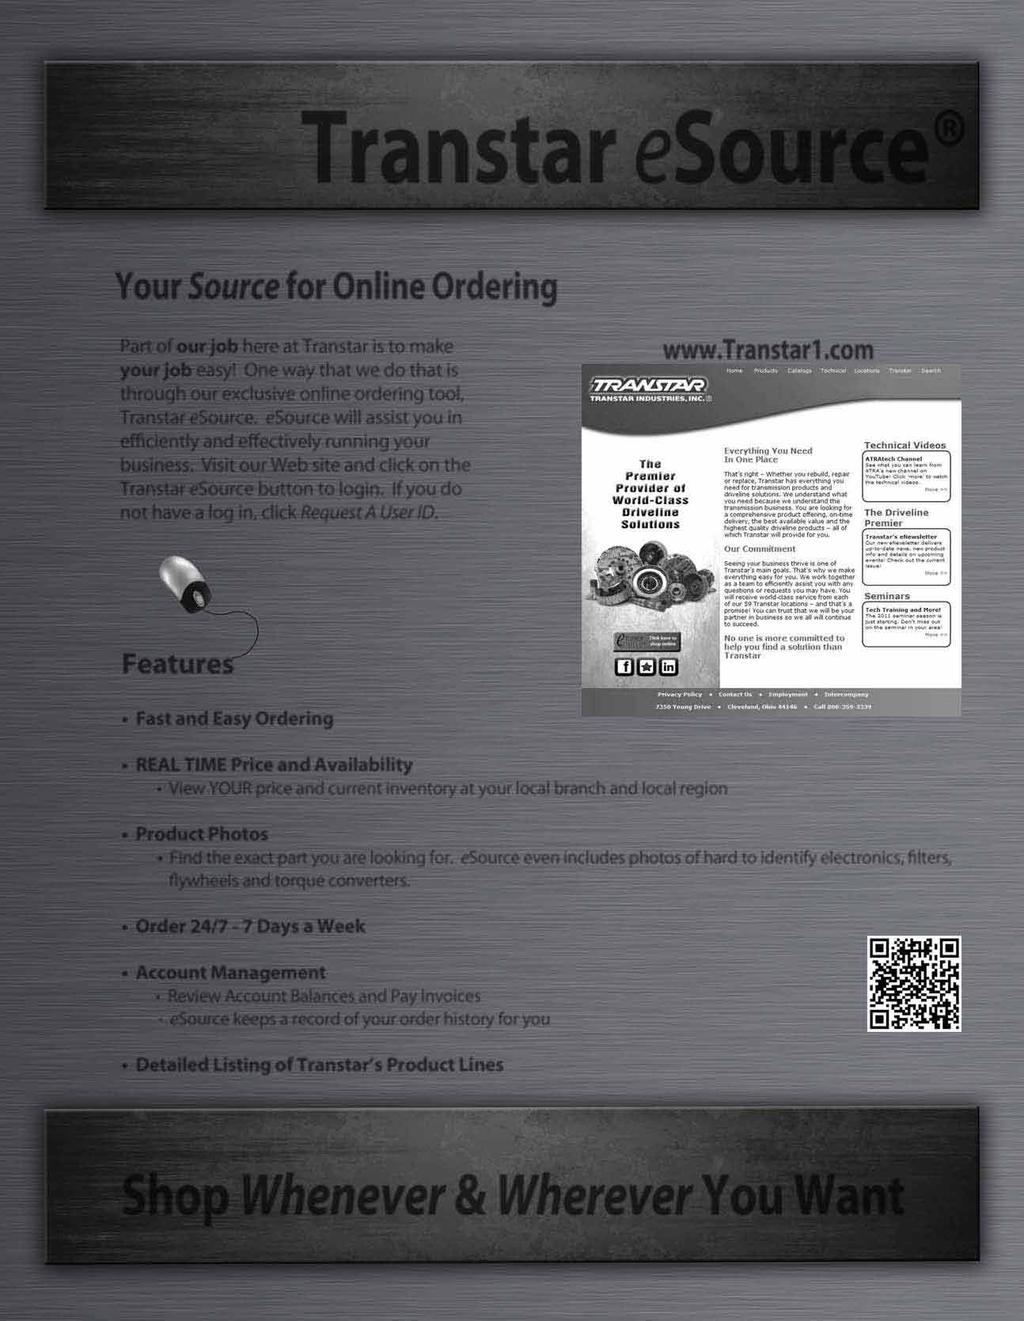 Transtar esource Your Source for Online Ordering Part of our job here at Transtar is to make your job easy! One way that we do that is through our exclusive online ordering tool, Transtar esource.